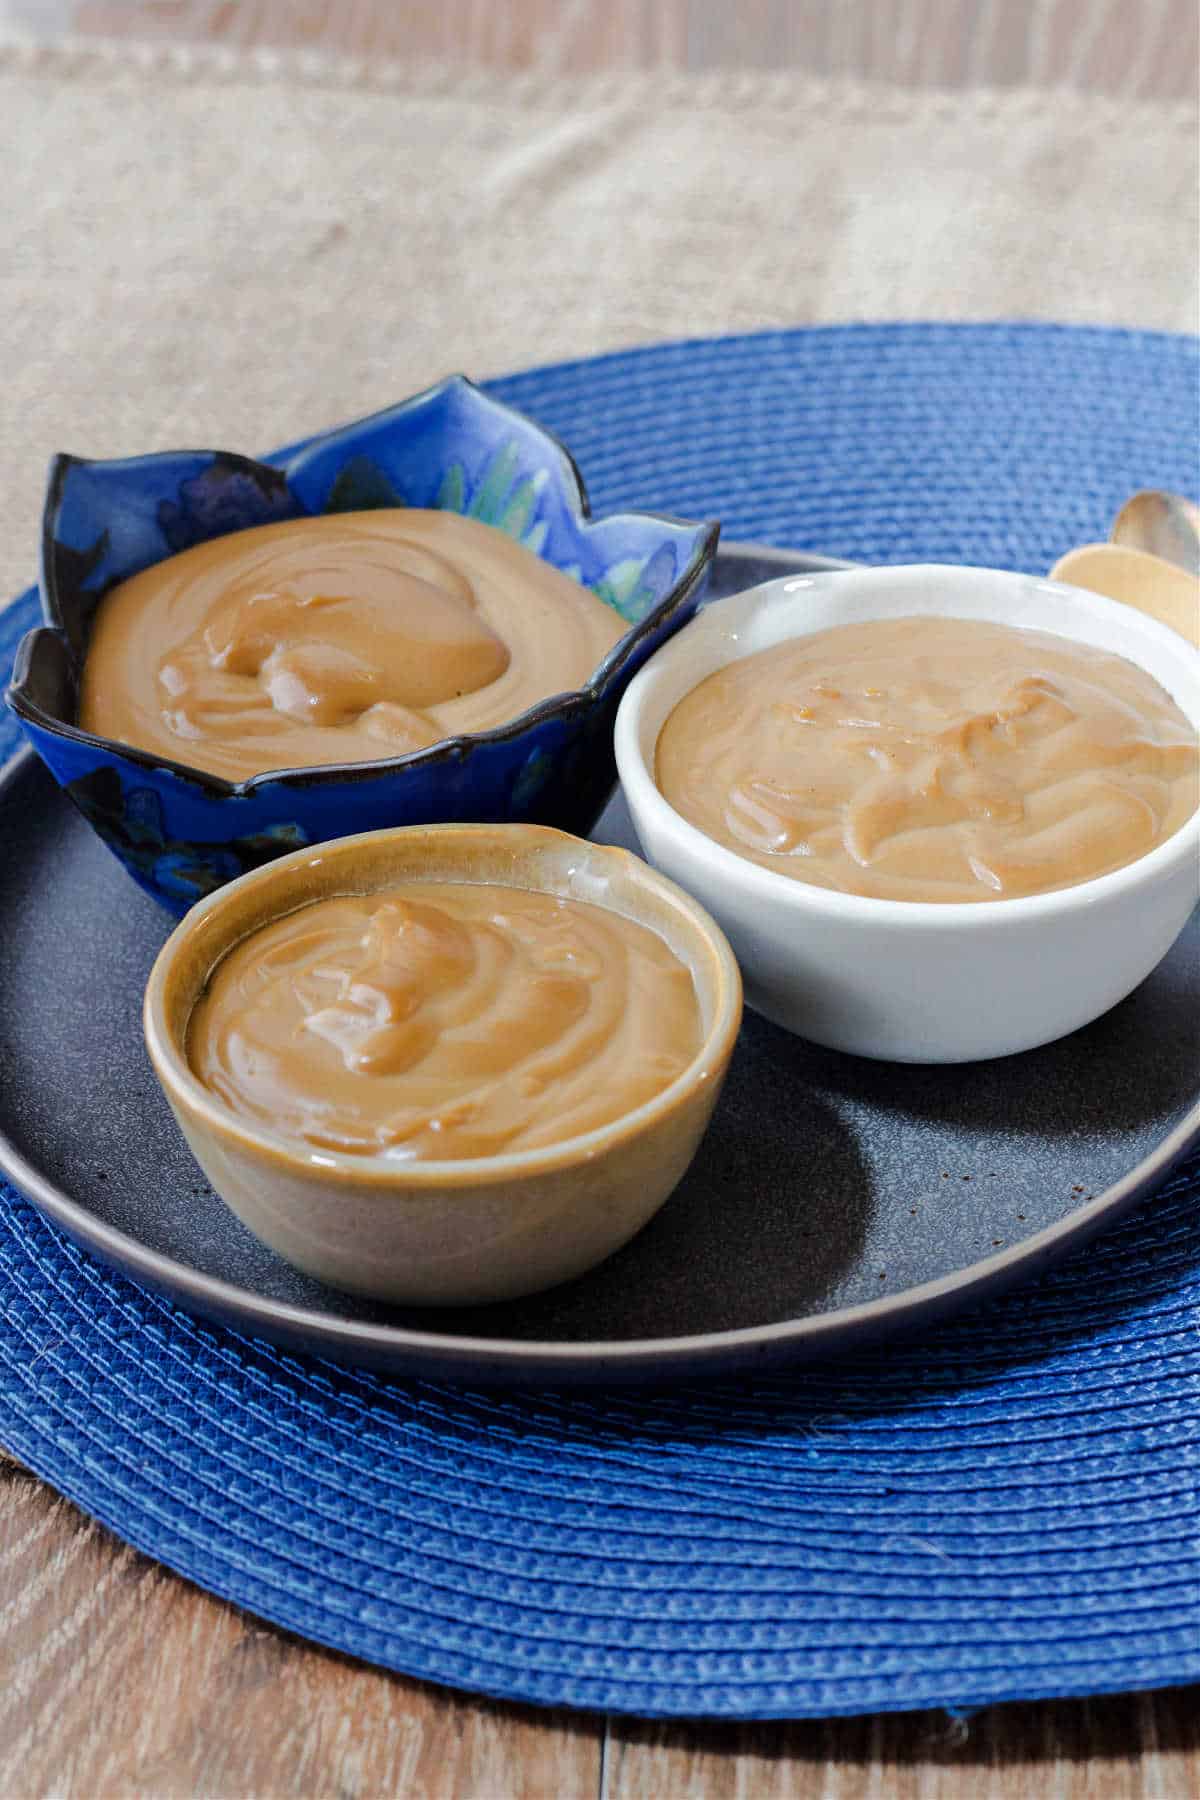 Three individual bowls of creamy butterscotch pudding on a serving plate, on a blue place mat.